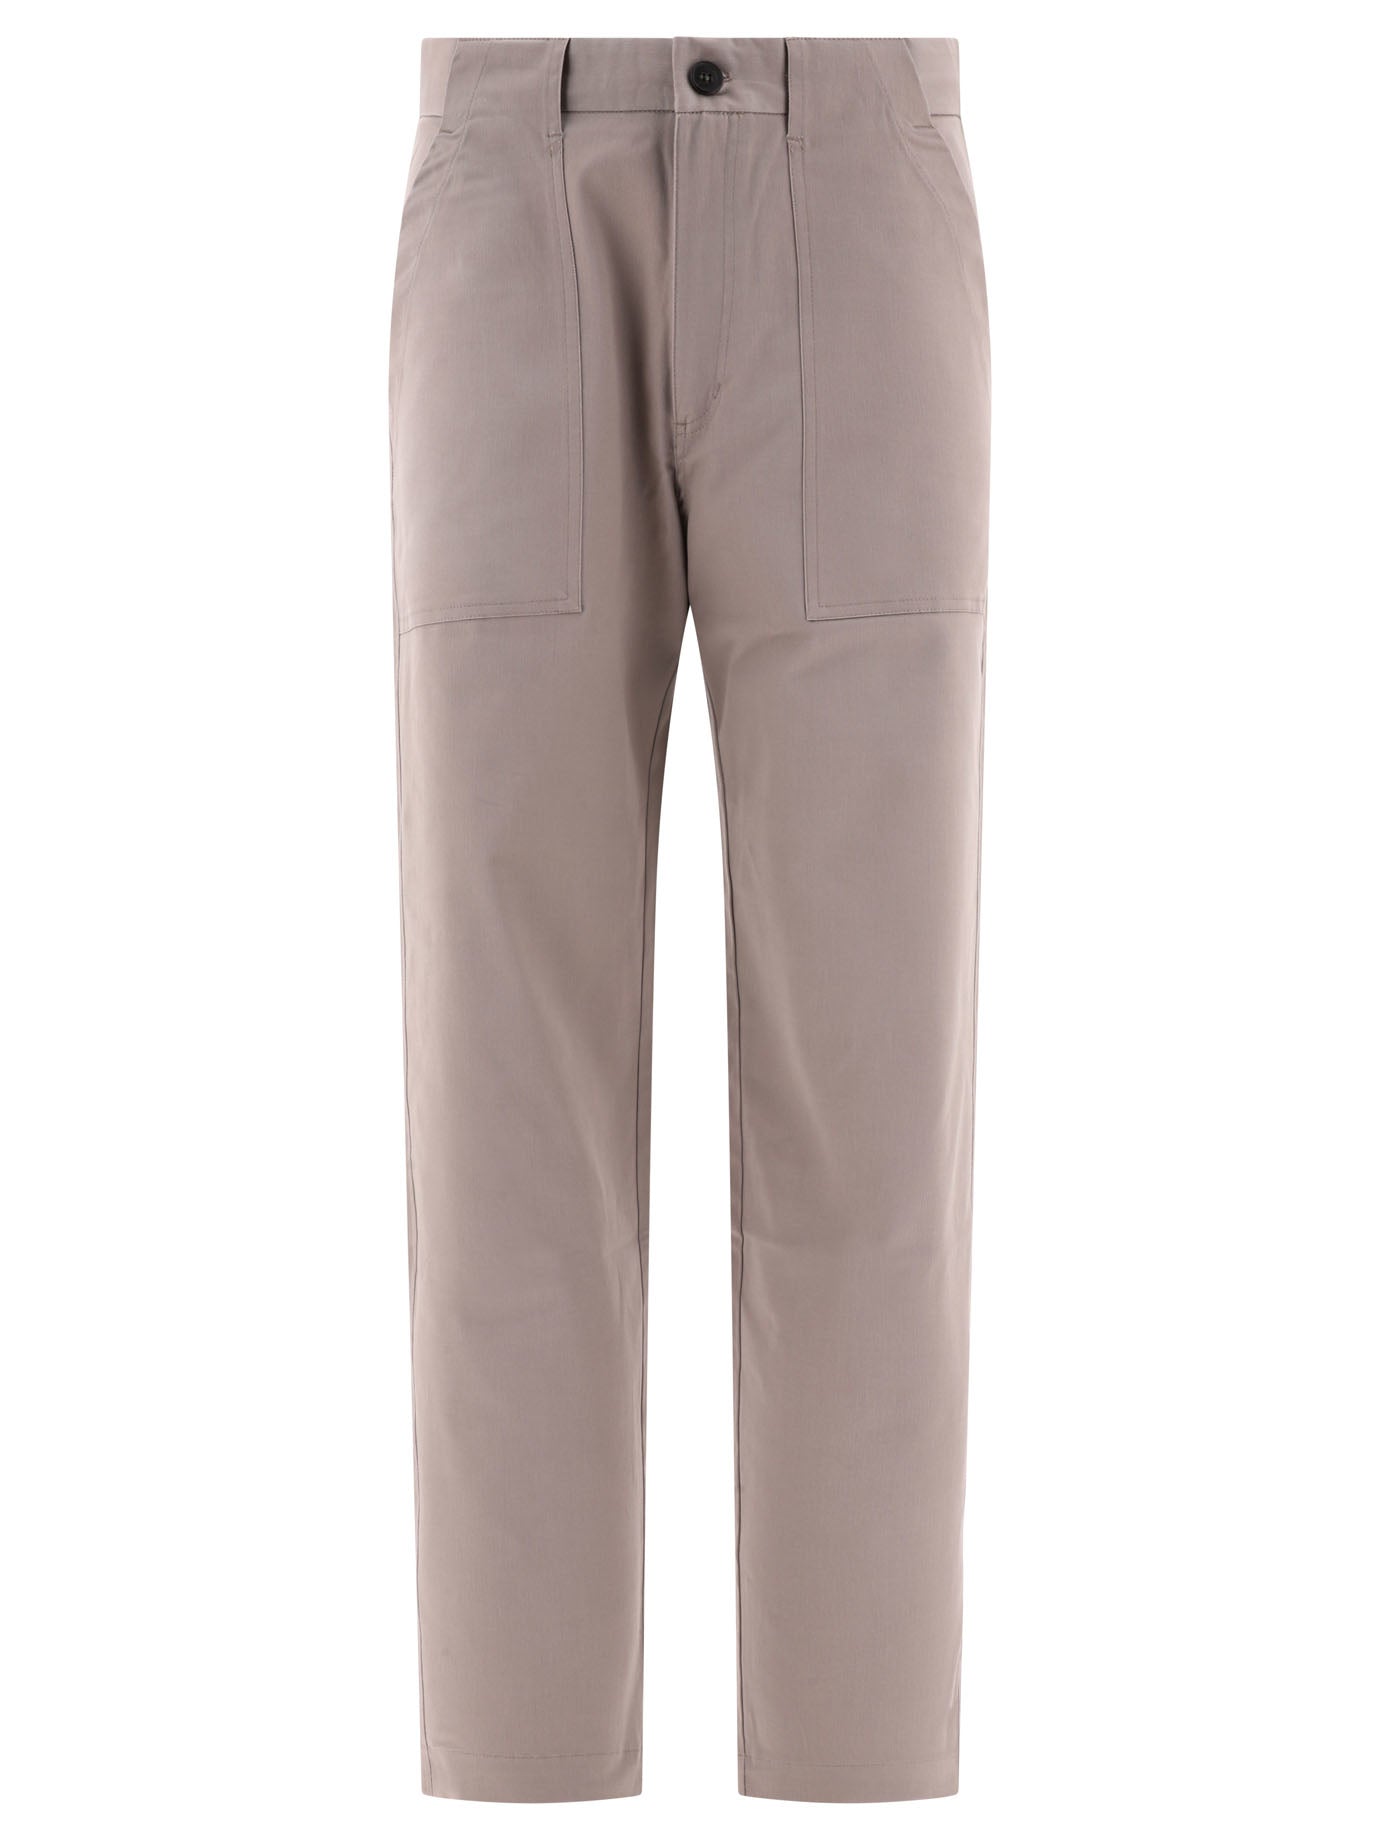 Andblue Hammer Trousers Brown